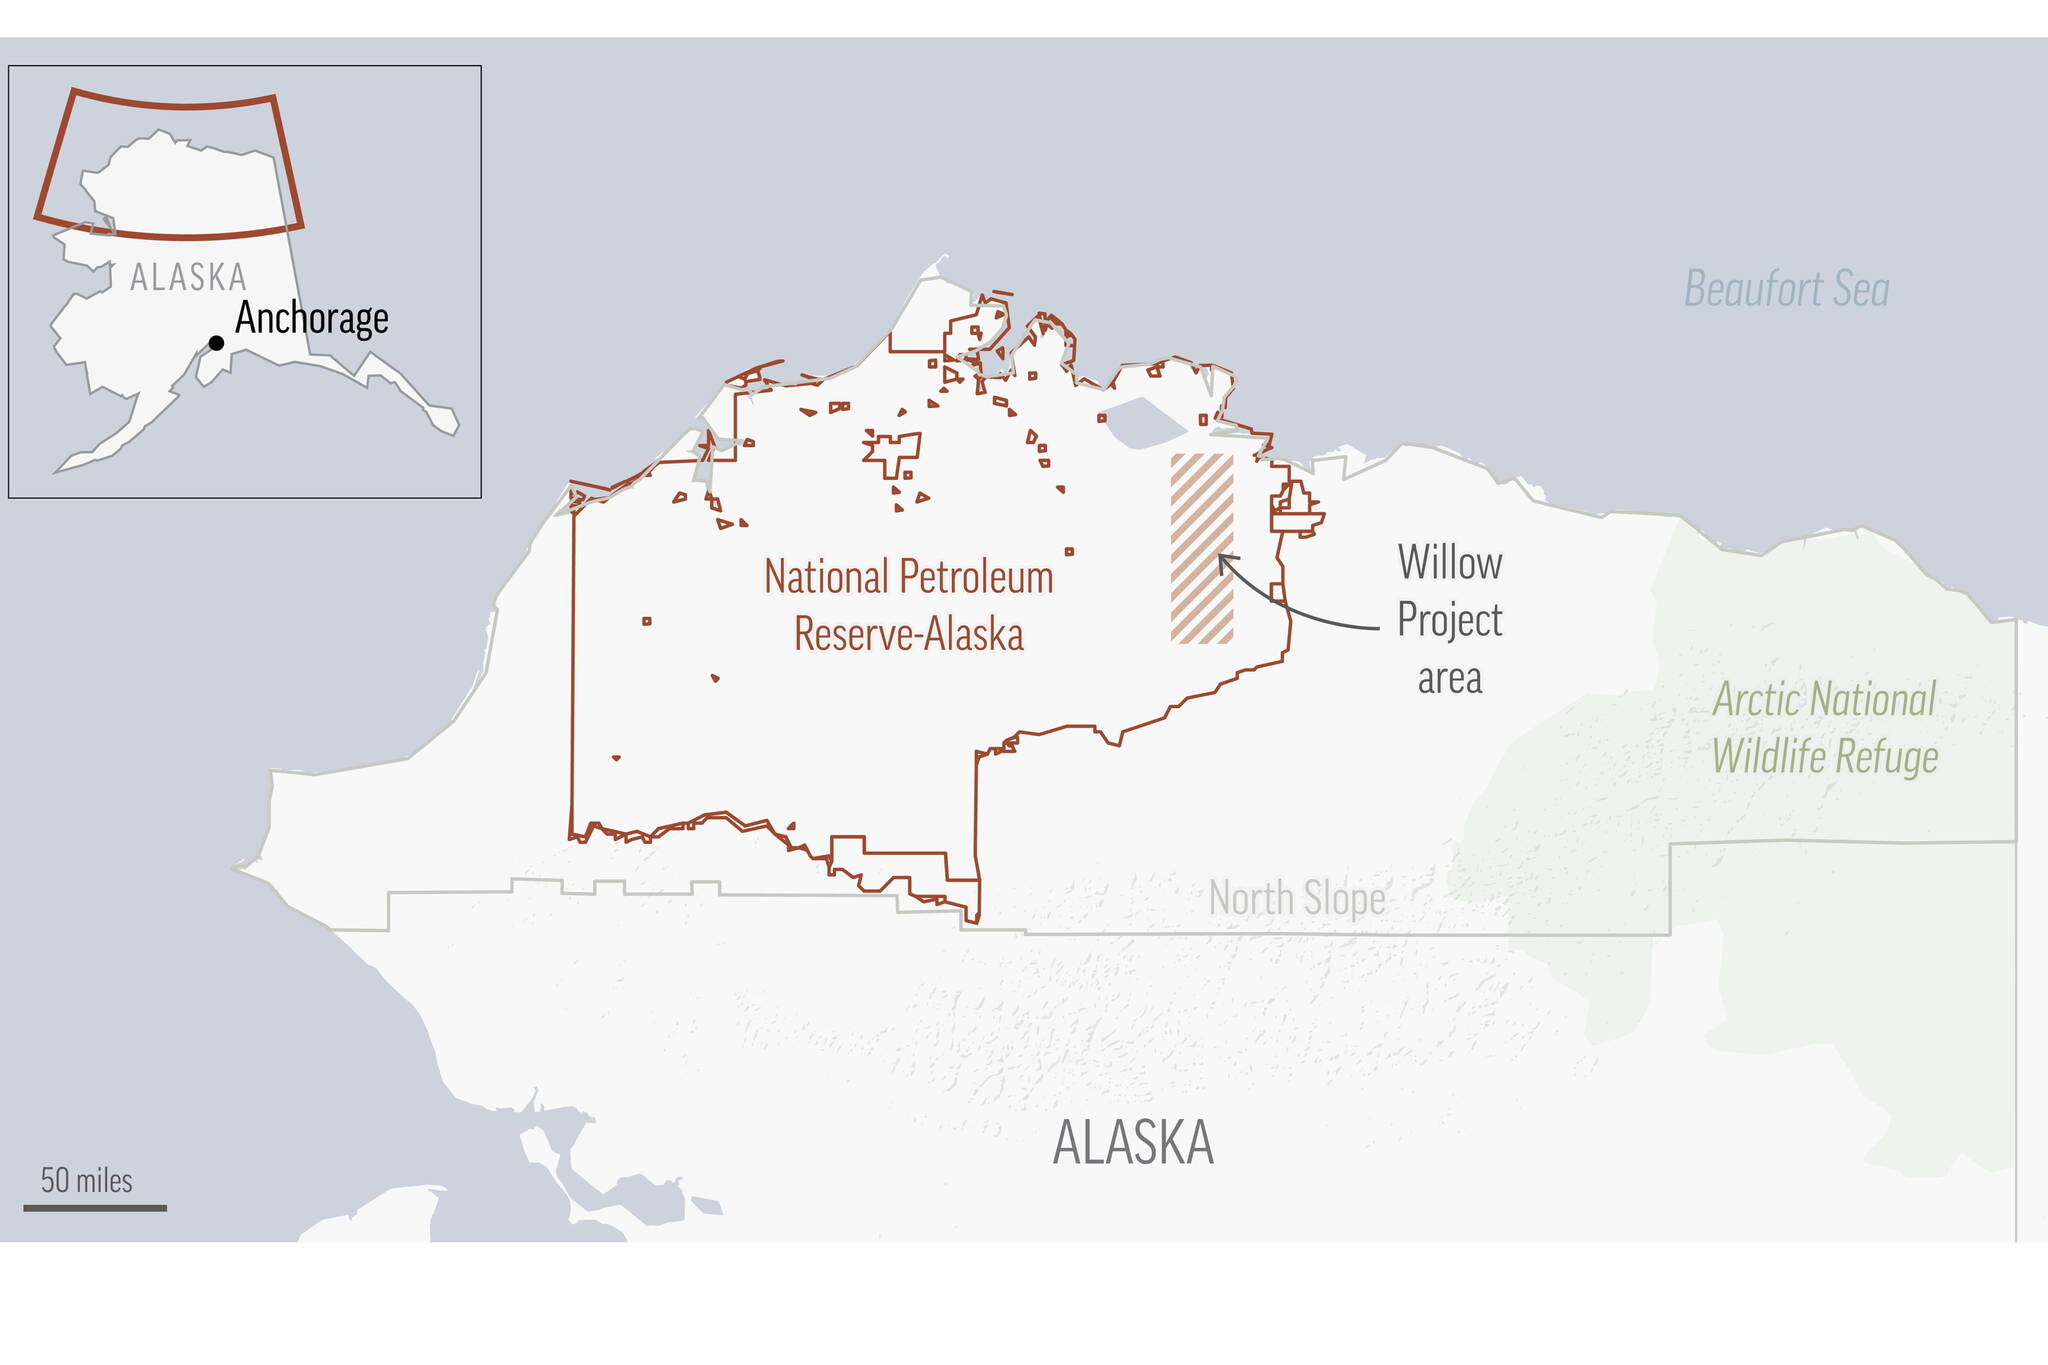 The Associated Press 
A map shows the location of the Willow oil field project in the National Petroleum Reserve-Alaska, where more than 200 drills are scheduled to be drilled during a 30-year period if approved.